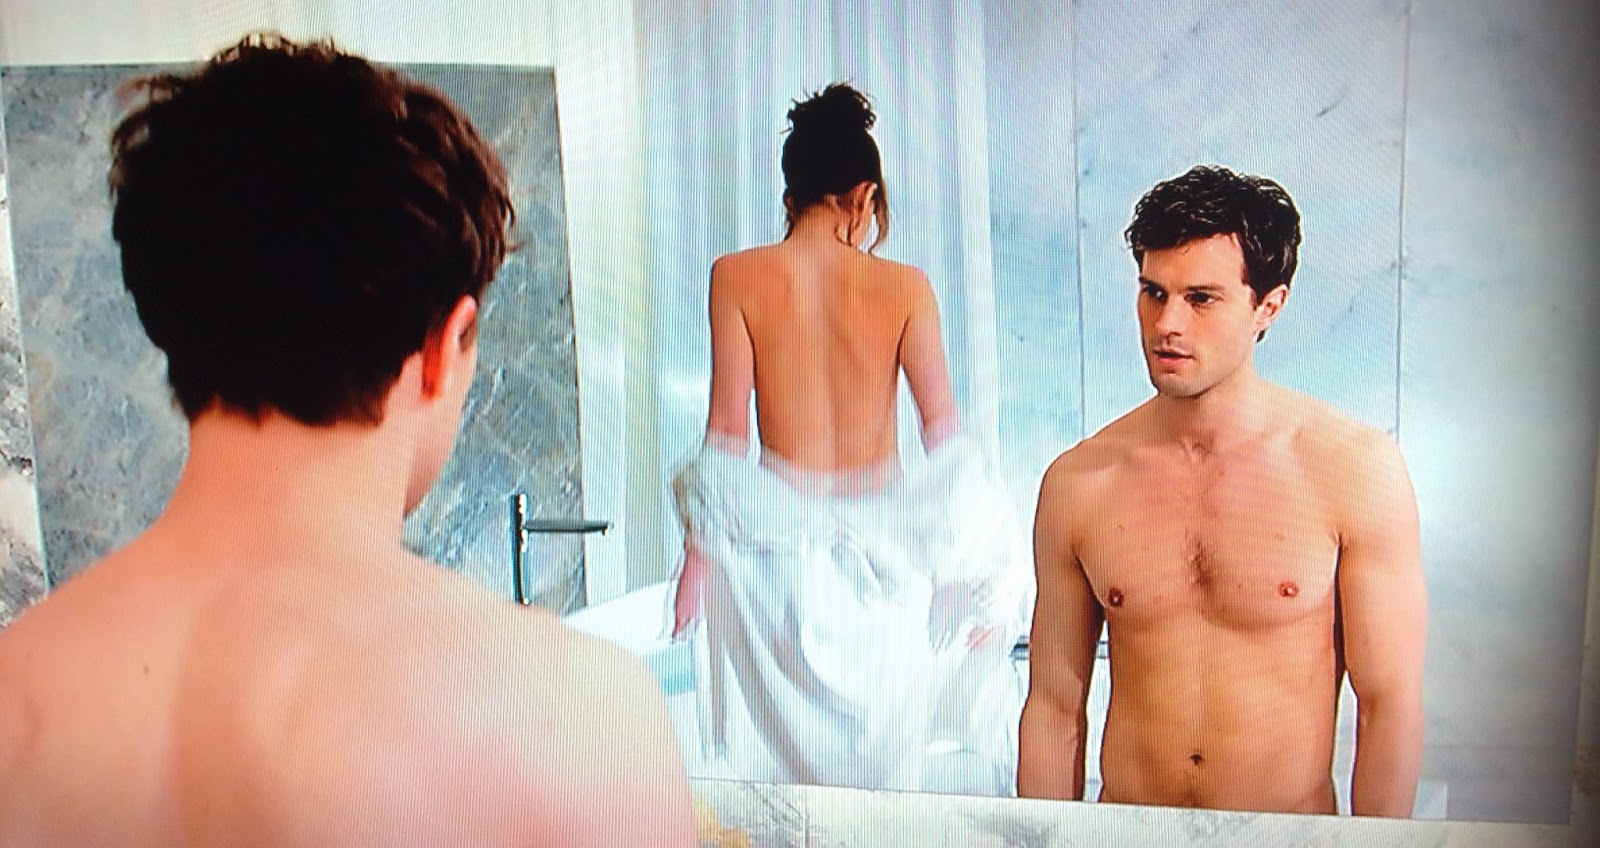 PHOTOS: Screen shots from the new Fifty Shades of Grey TV Spot.